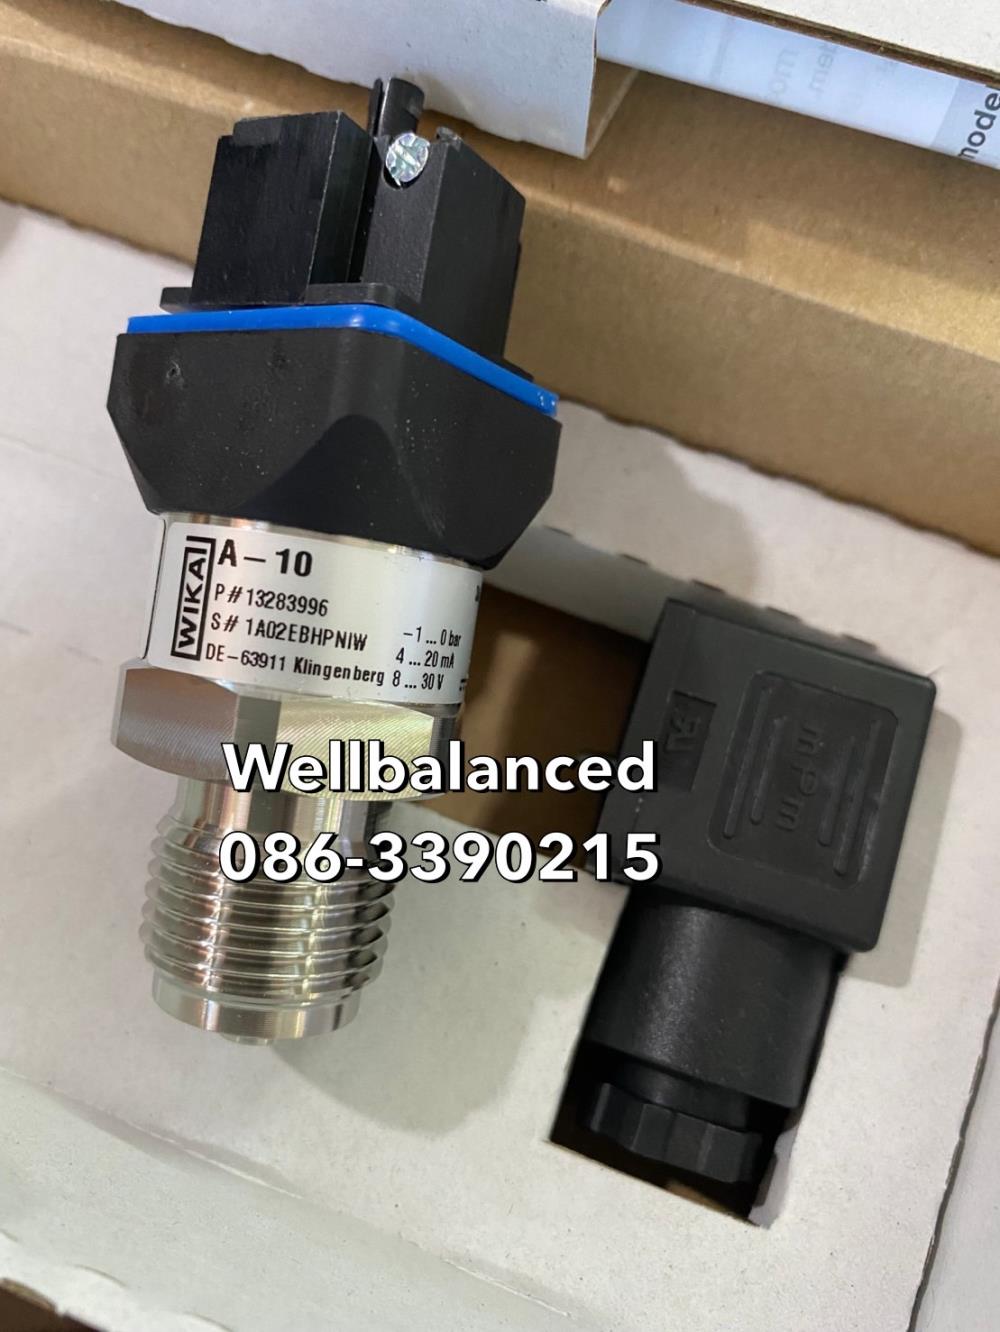 WIKA Pressure Transmitter : A-10 : -1...0 bar,WIKA Pressure Transmitter : A-10 : -1...0 bar,WIKA Pressure Transmitter : A-10 : -1...0 bar,Automation and Electronics/Electronic Components/Transmitters